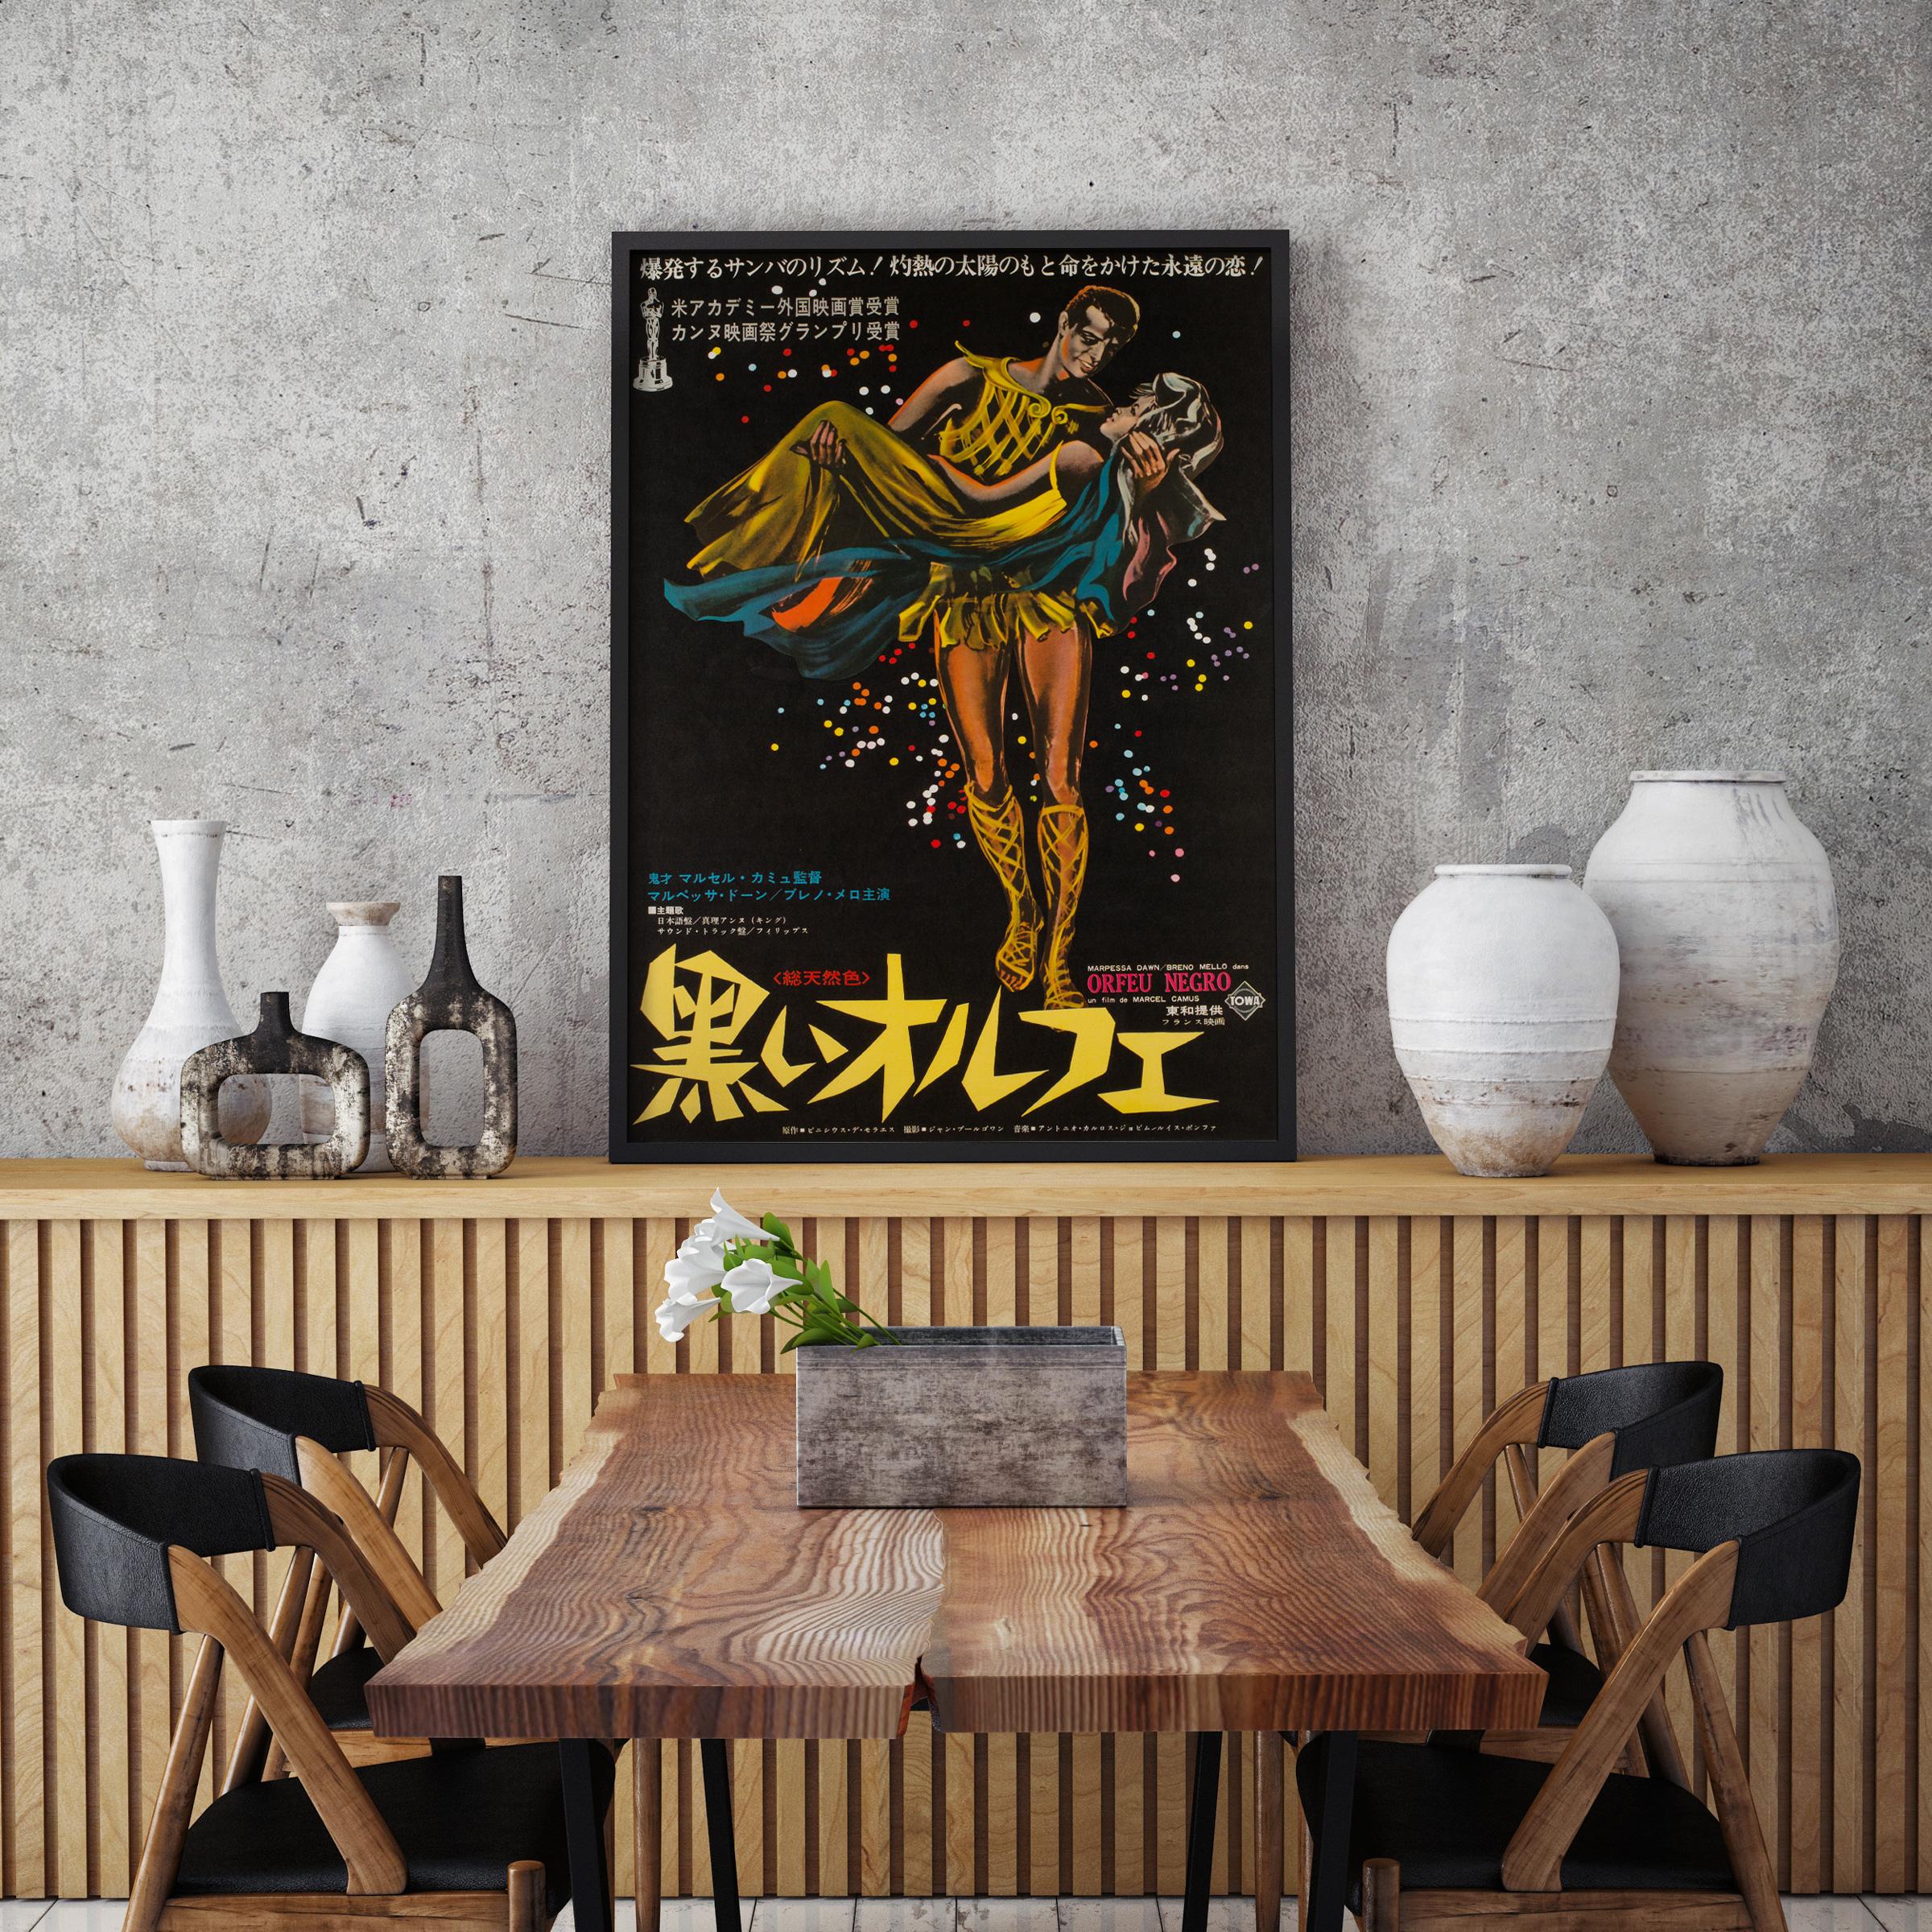 Fabulous original Japanese film poster for Brazilian Palme d'Or and Oscar winner black orpheus.

This vintage movie poster is sized 20 x 28 5/8 inches. It will be sent rolled (unframed).

Year 1960
Poster Type JPN B2 (20 x 28 inches)
Style